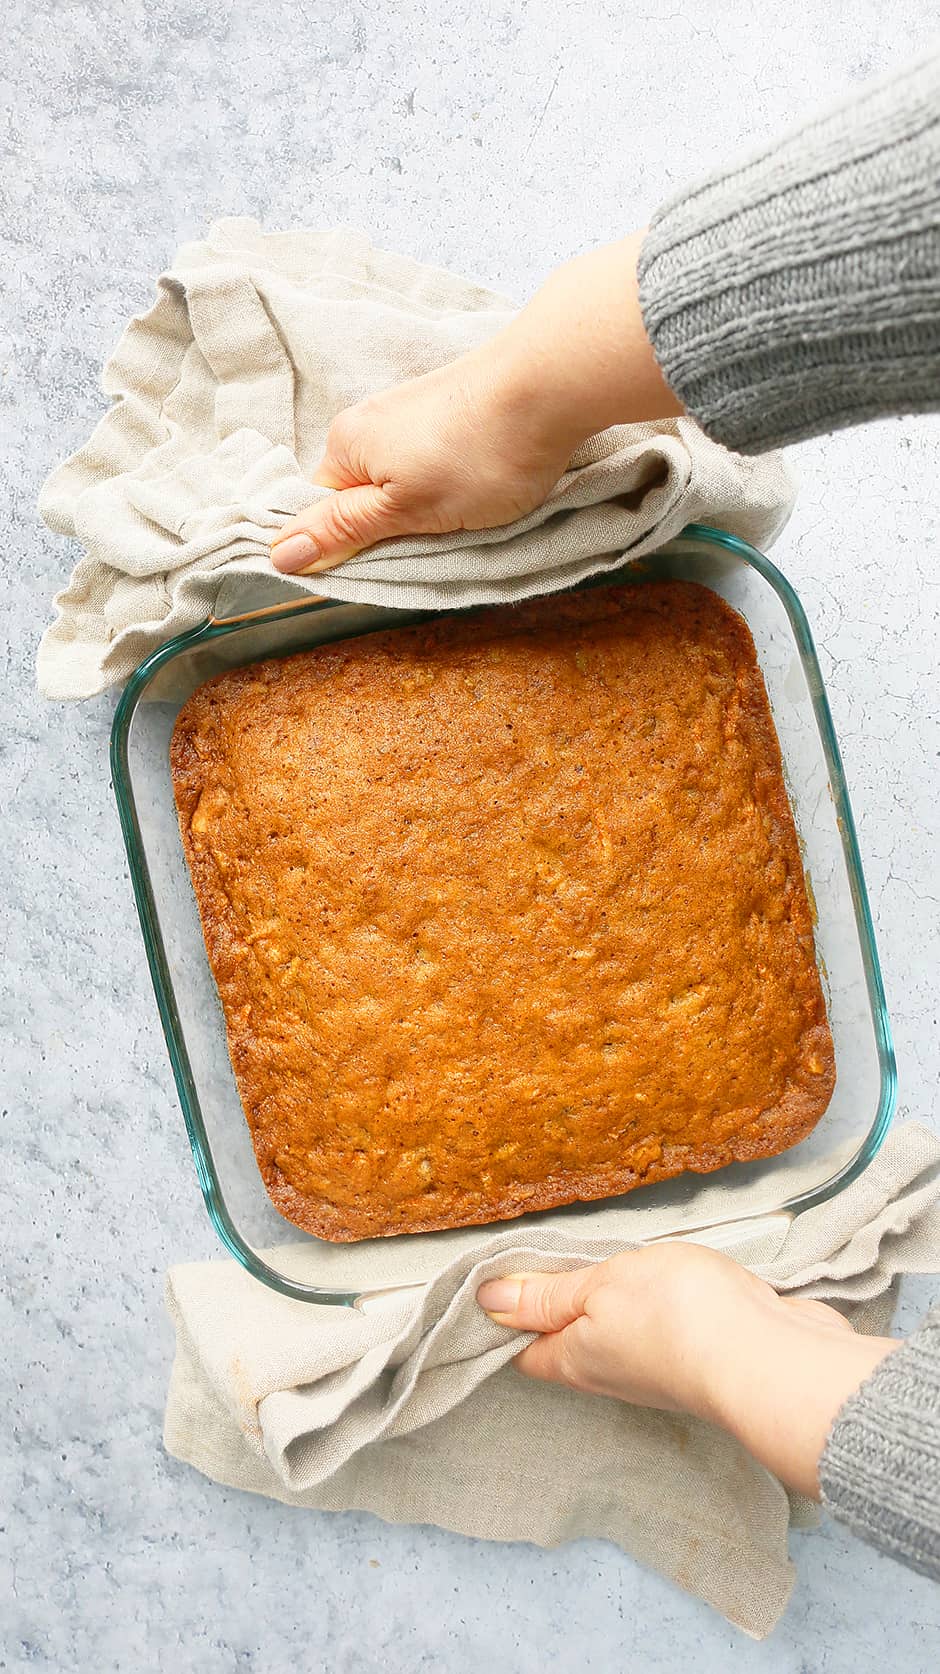 2 hands holding a hot carrot walnut cake with folded kitchen towels.